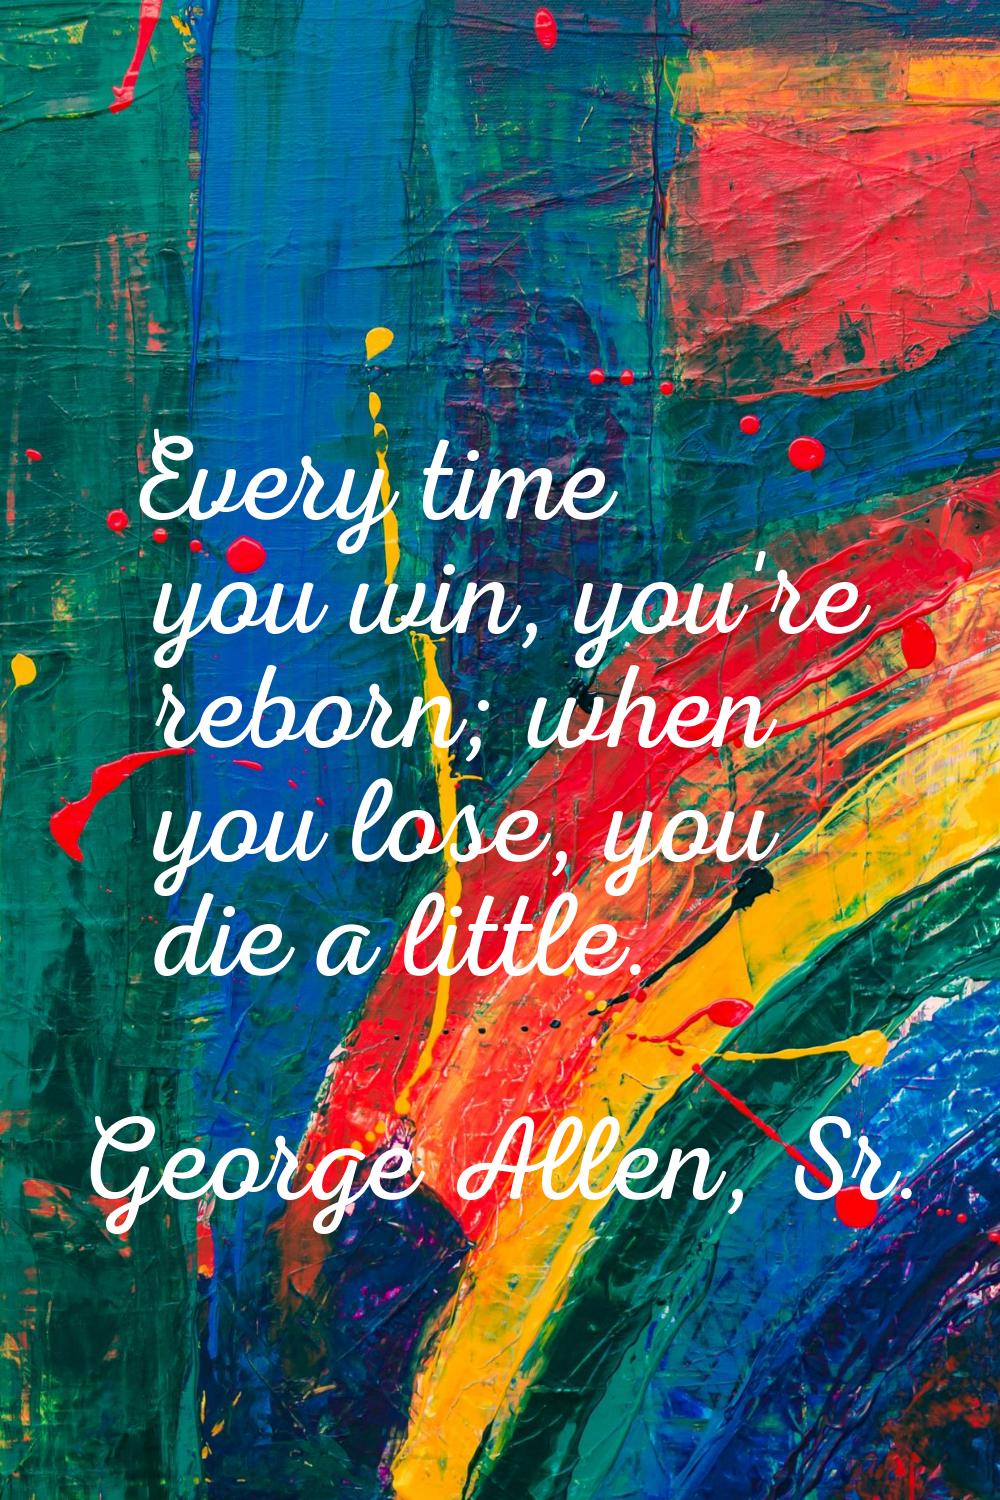 Every time you win, you're reborn; when you lose, you die a little.